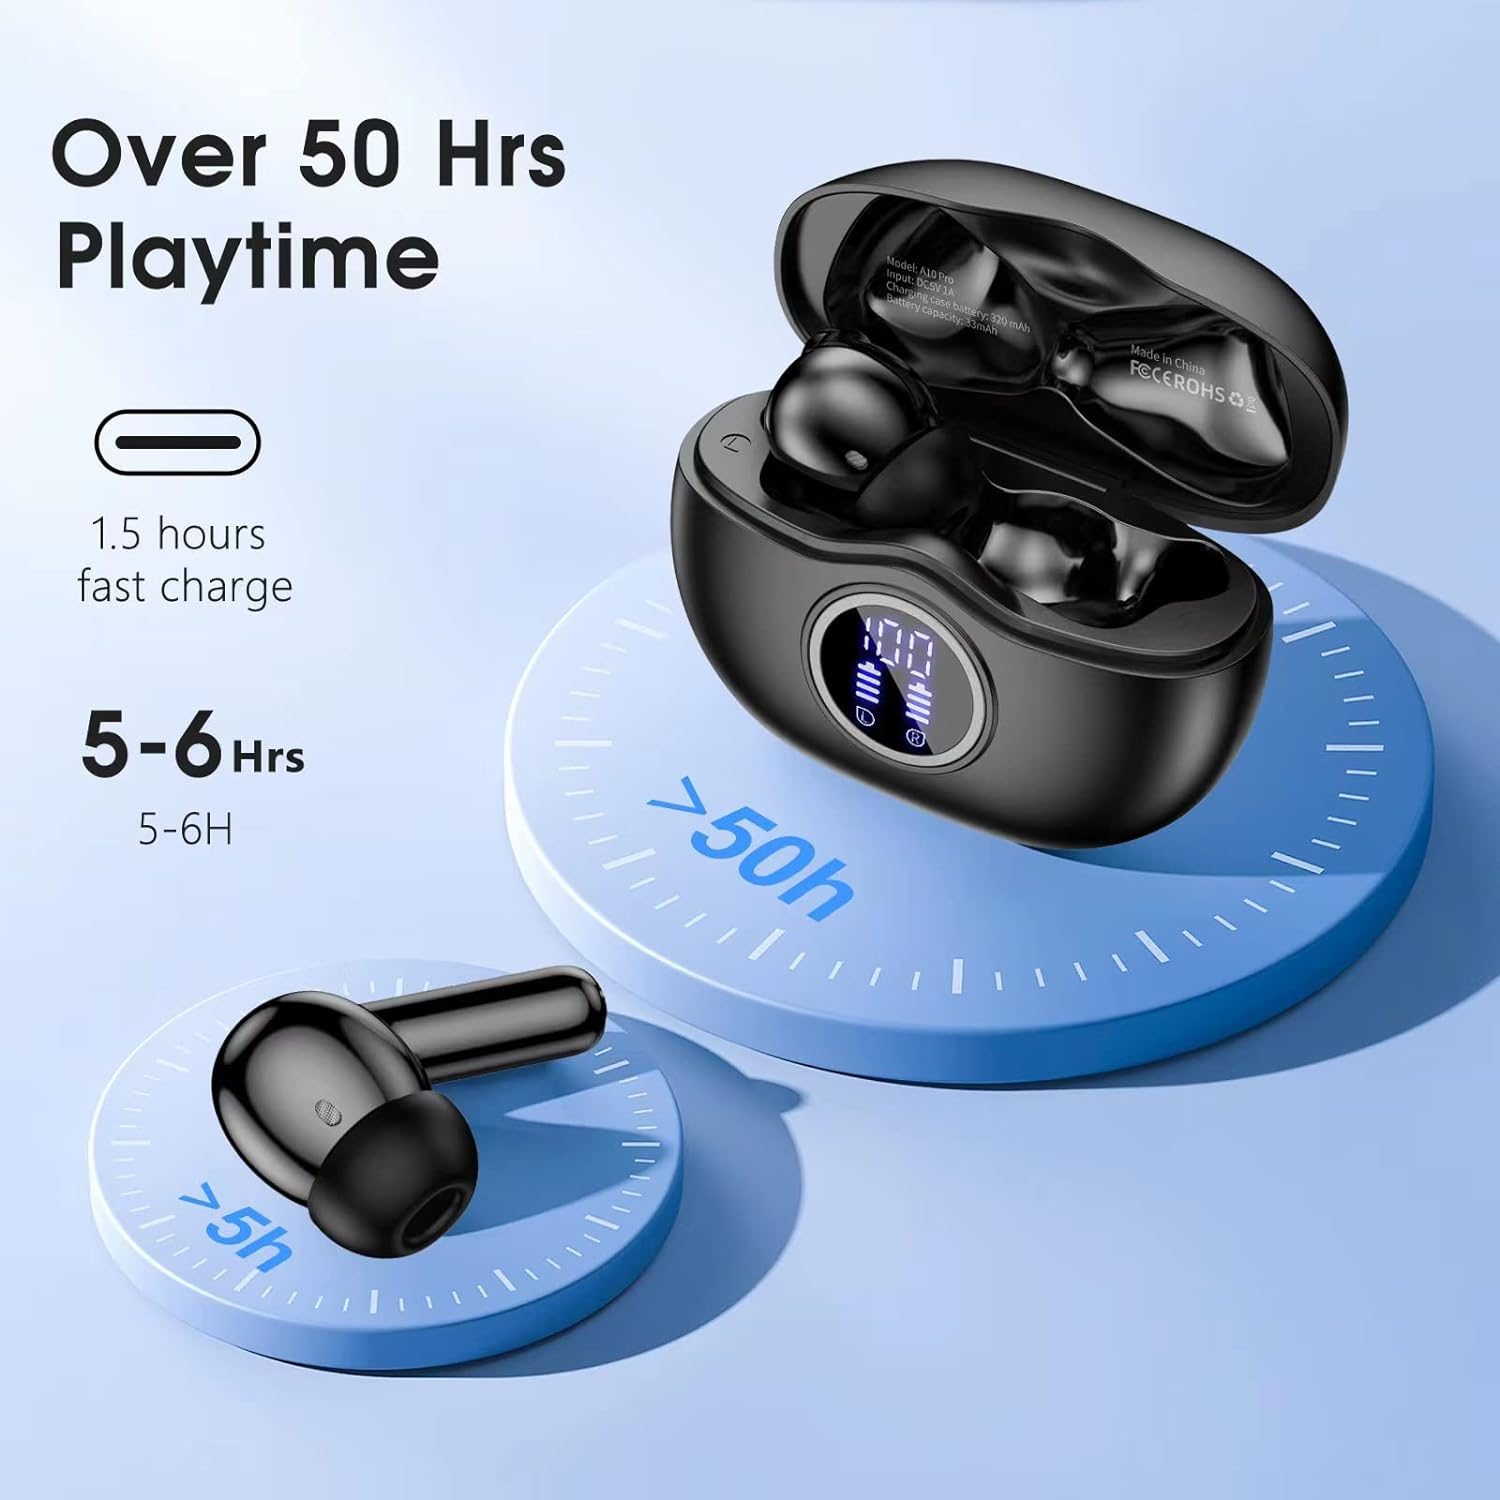 HKERR Wireless Earbuds, 50Hrs Playtime Bluetooth Earbuds Built in Noise Cancellation Mic with Charging Case, Bluetooth Headphones with Stereo Sound, IPX7 Waterproof Ear Buds for iPhone and Android